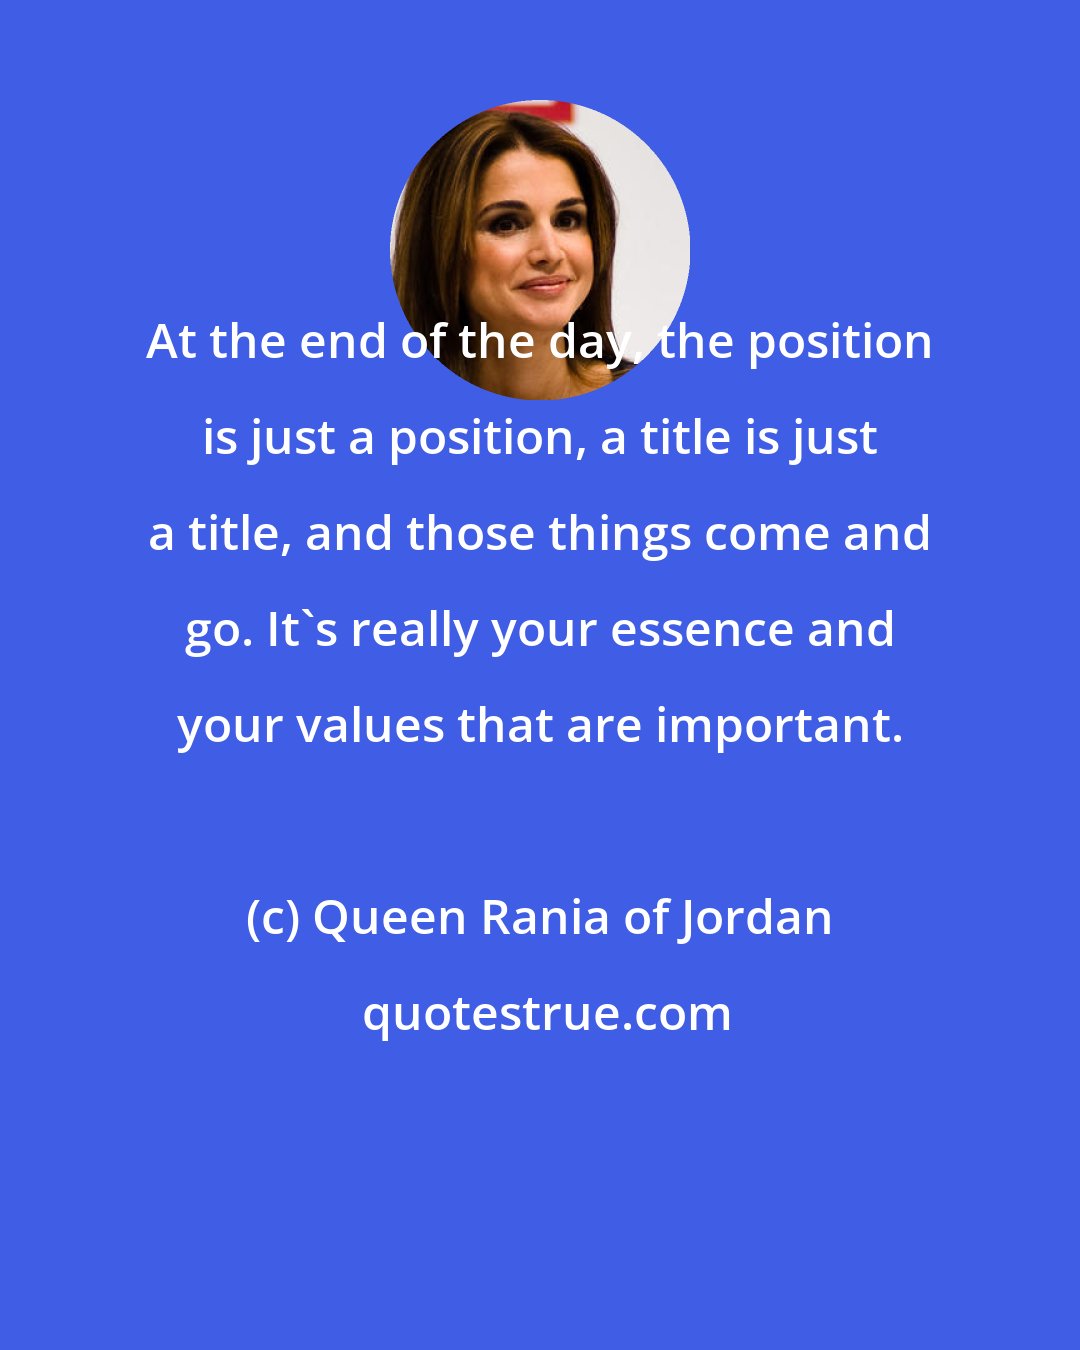 Queen Rania of Jordan: At the end of the day, the position is just a position, a title is just a title, and those things come and go. It's really your essence and your values that are important.